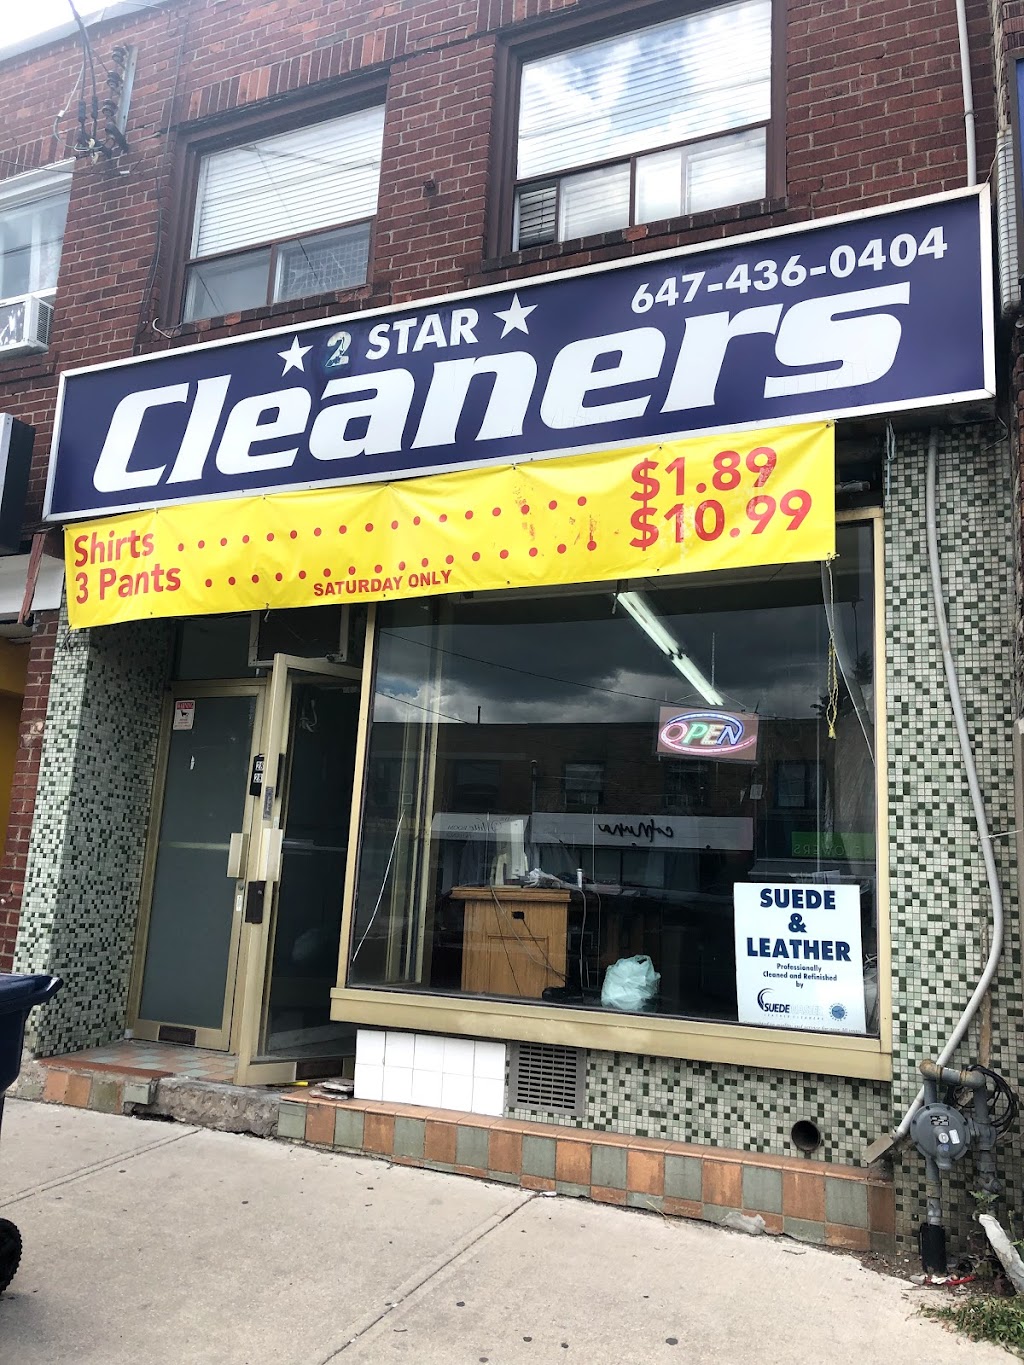 2 Star Cleaners | 2850 Dufferin St, North York, ON M6B 3S3, Canada | Phone: (647) 436-0404